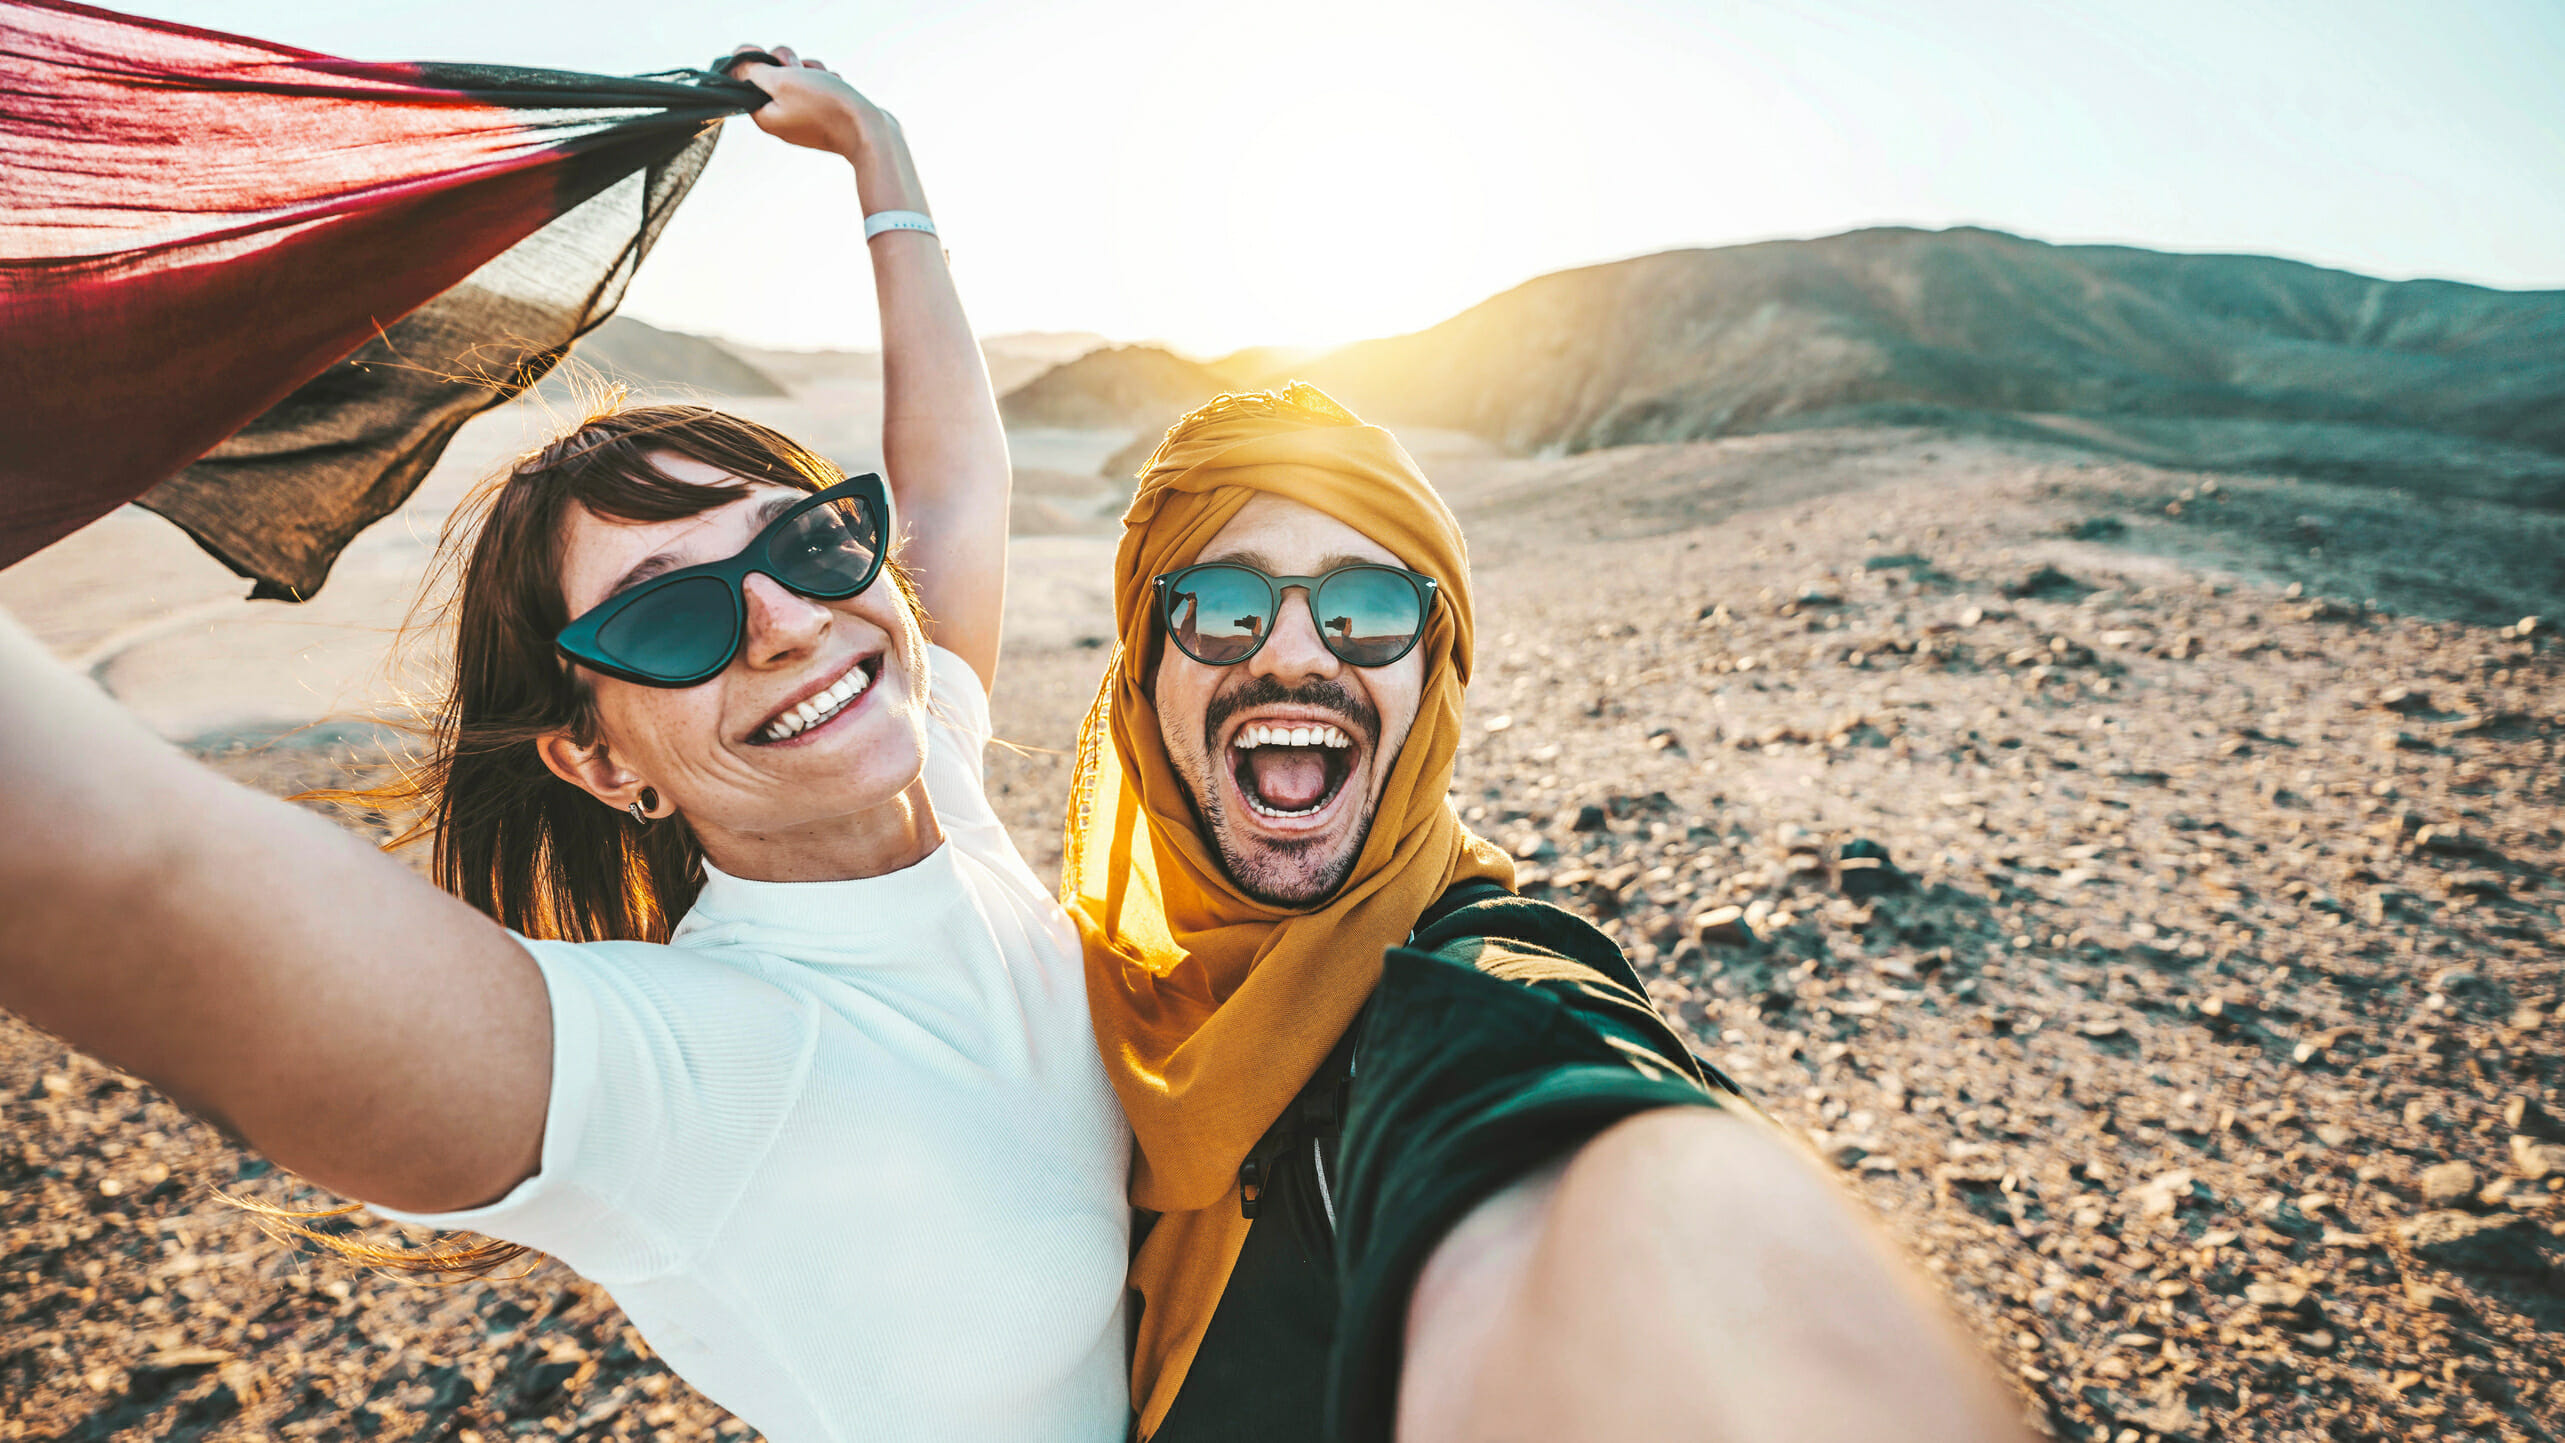 Happy couple of travelers taking selfie picture in rocky desert